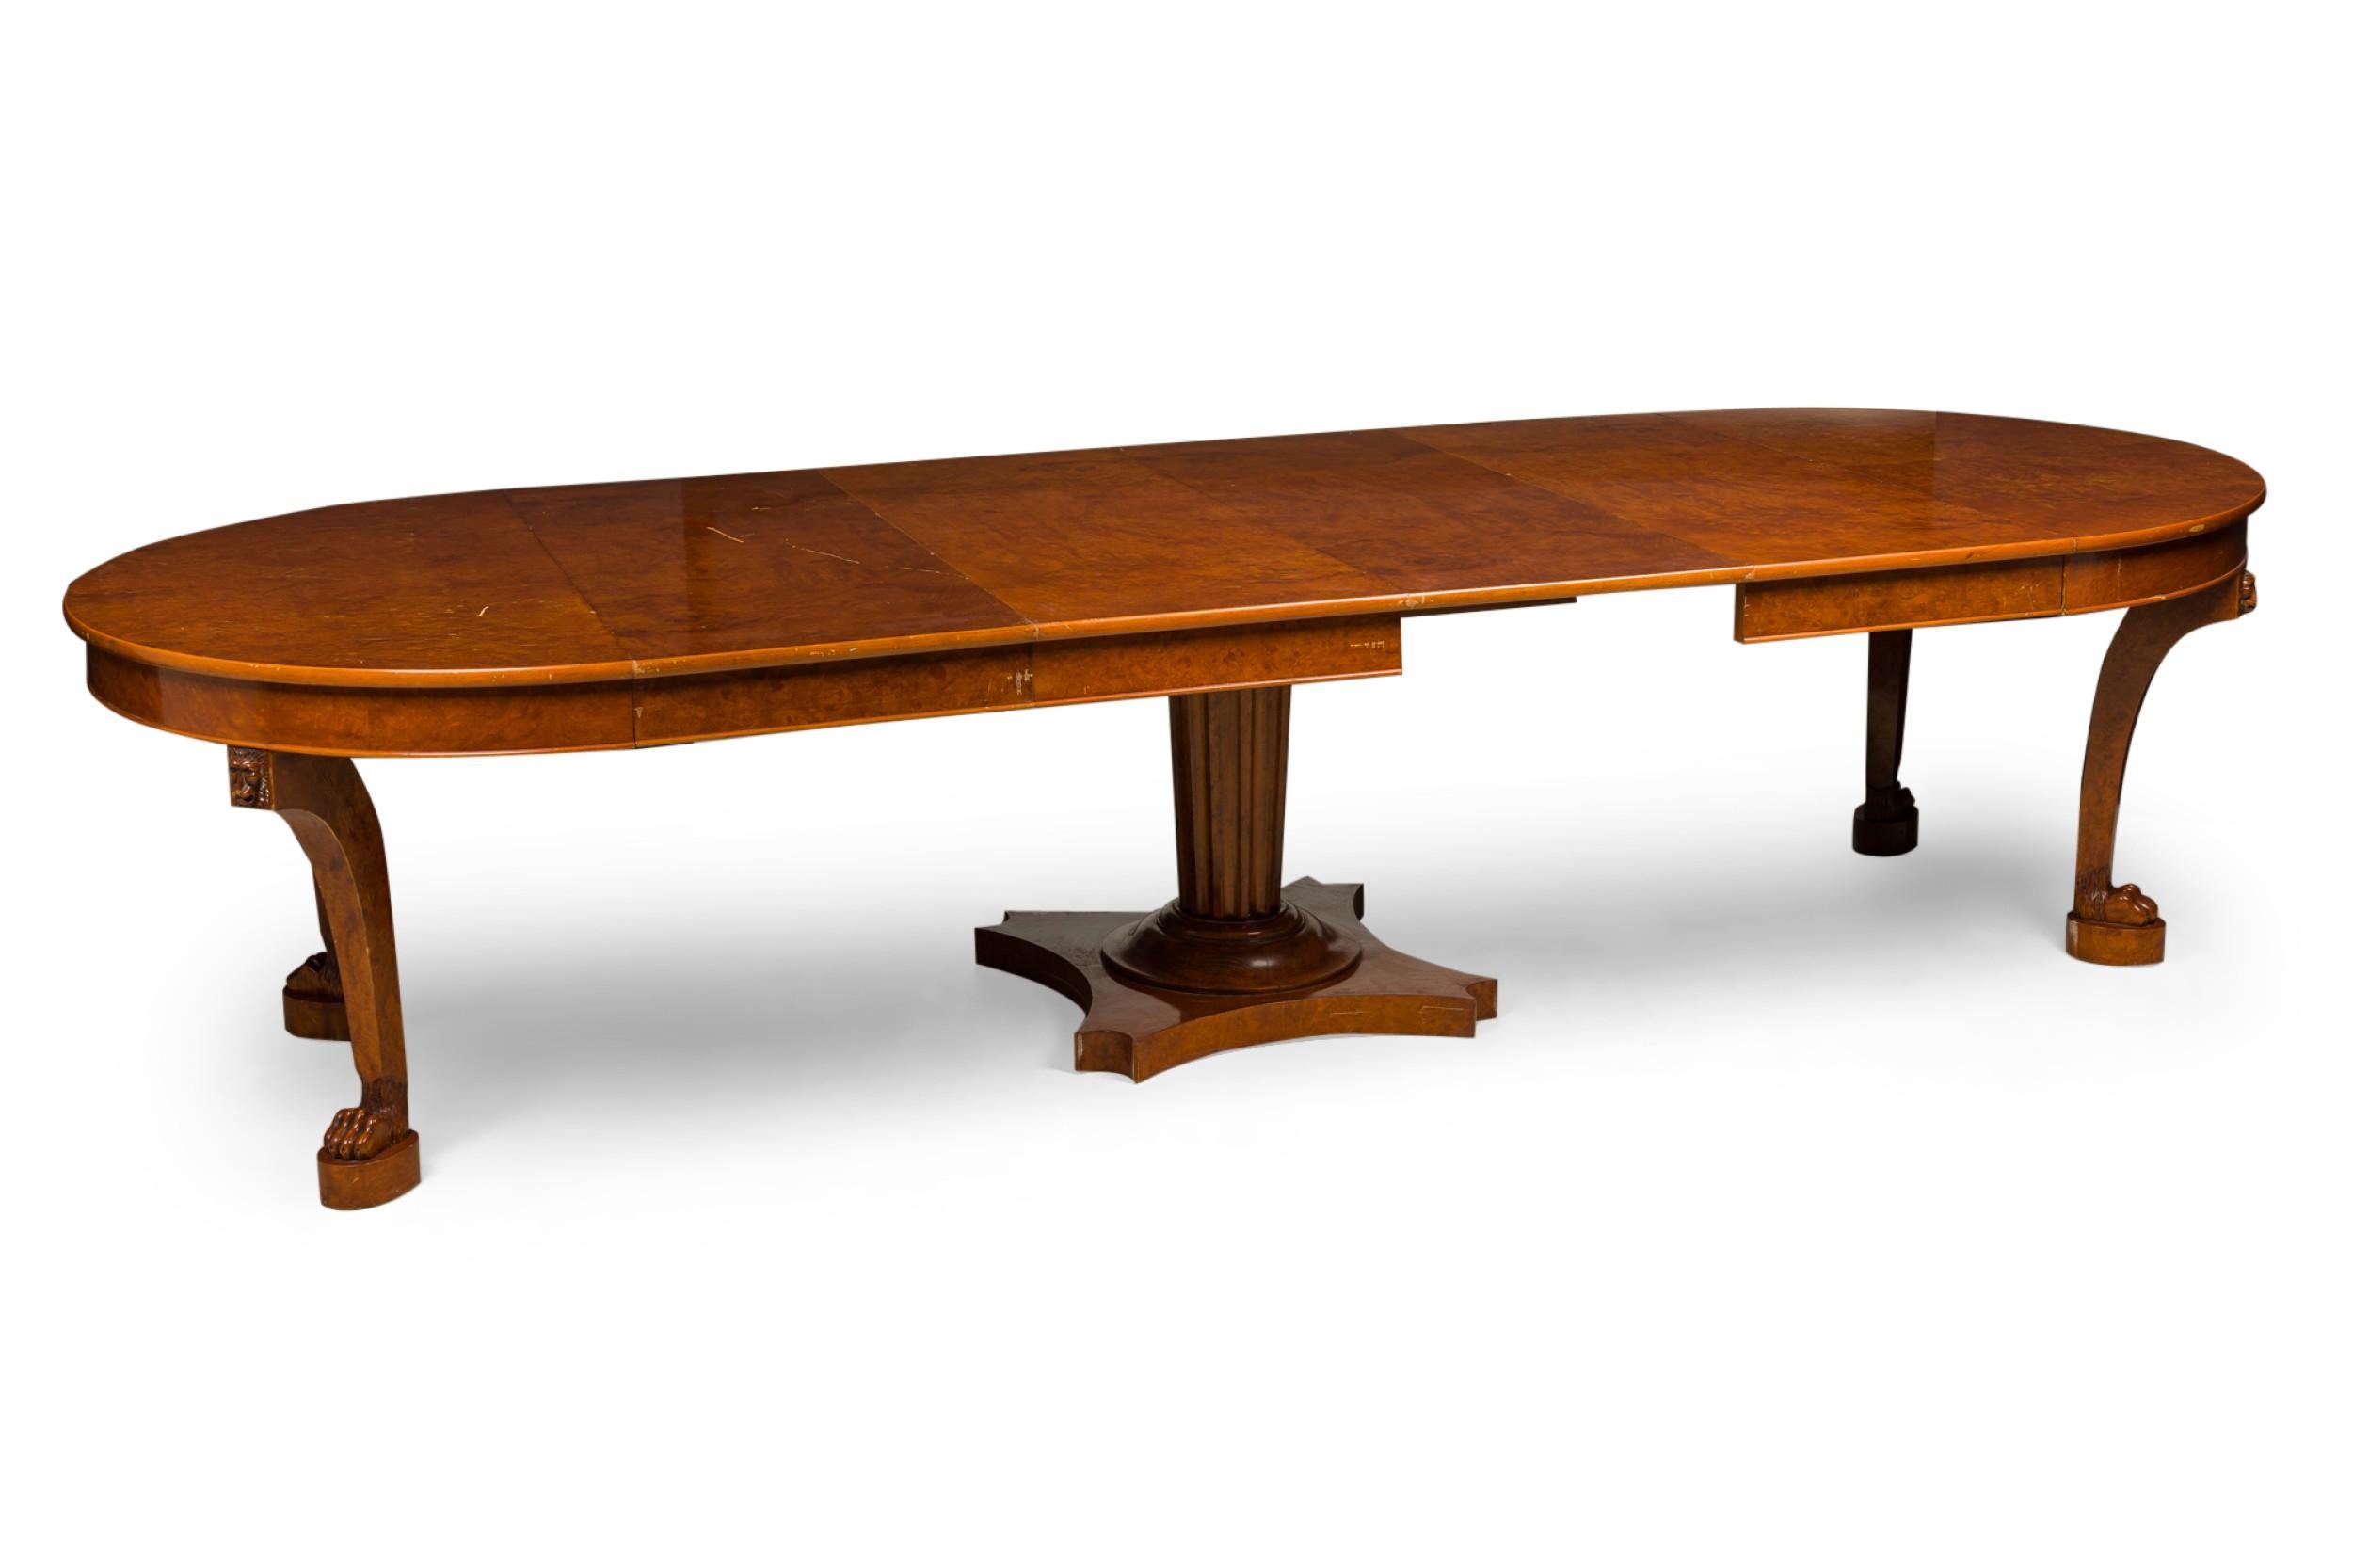 French Empire Revival Style Burled Walnut Extension Dining / Center Table For Sale 7